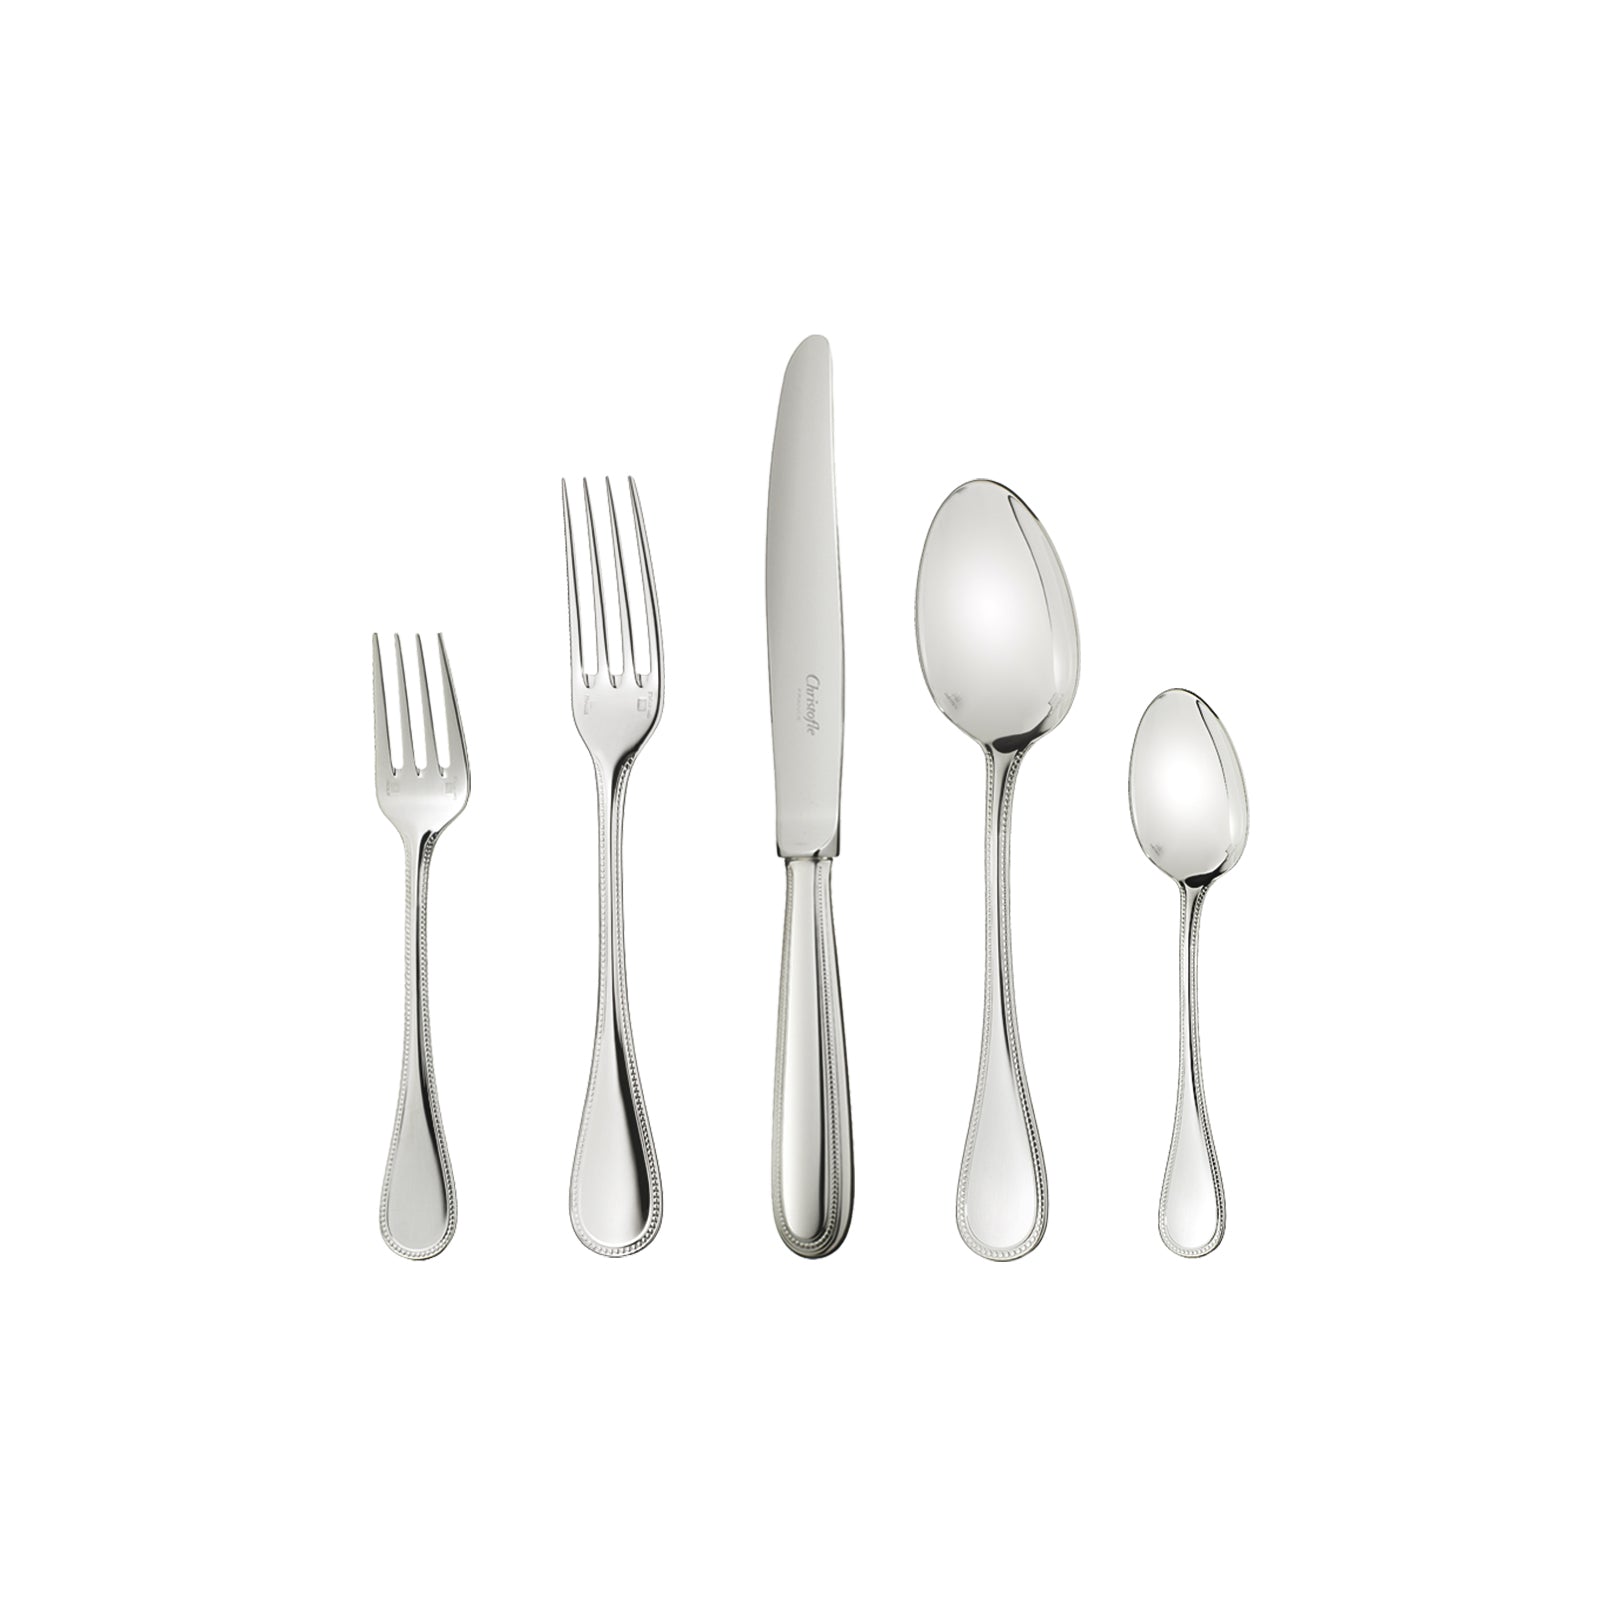 Perles Silver-Plated 5-piece place setting